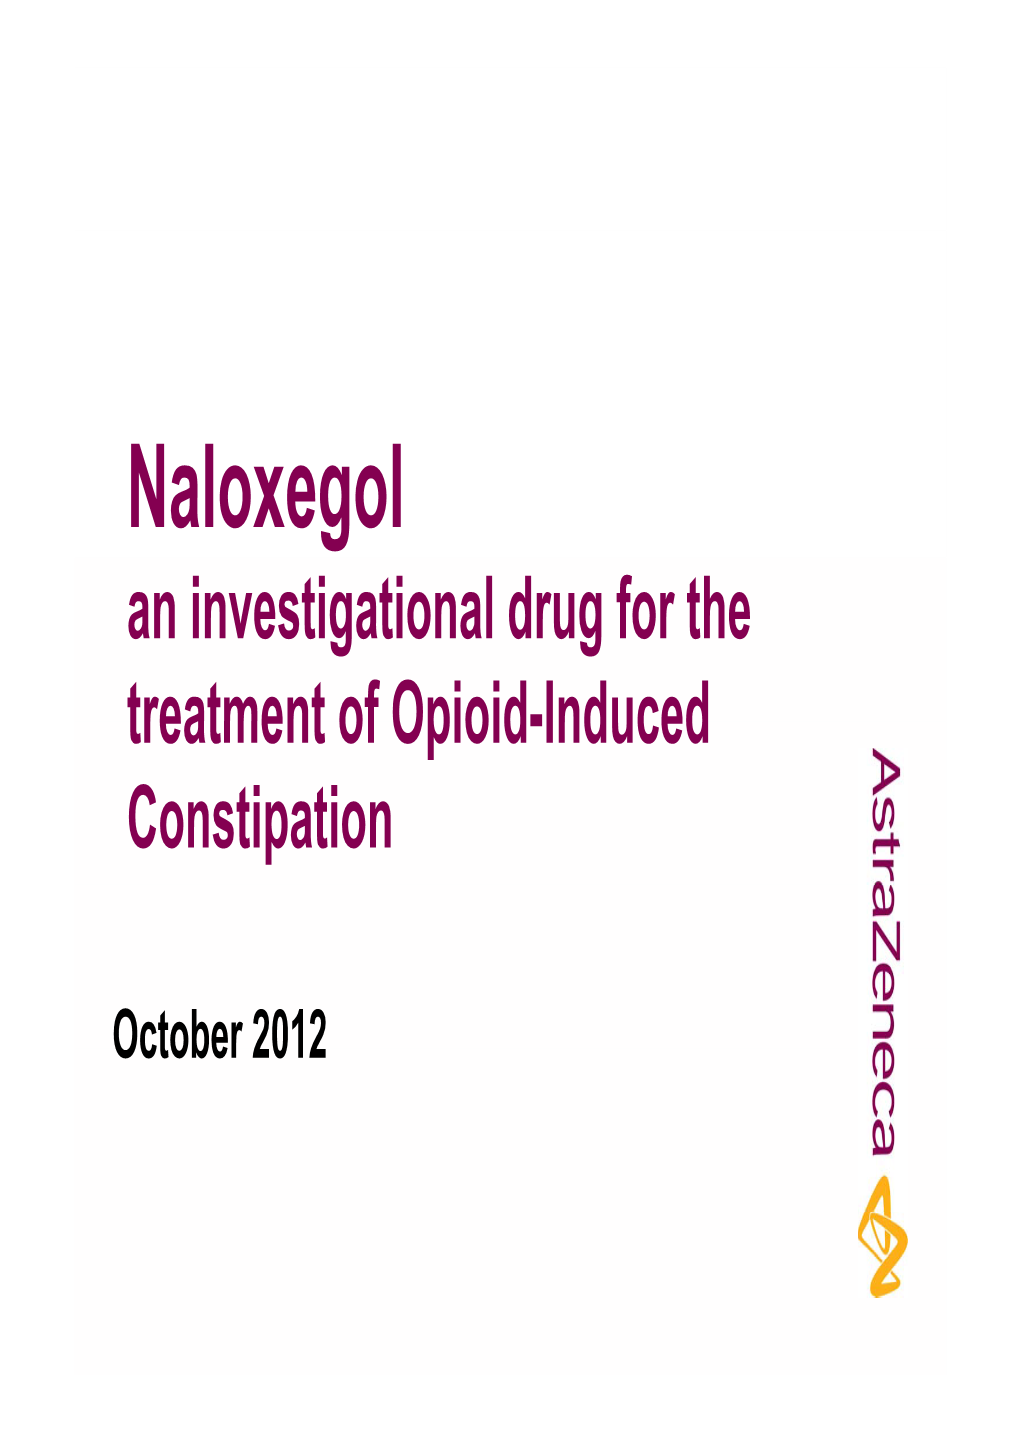 Naloxegol an Investigational Drug for the Treatment of Opioid -Induced Constipation